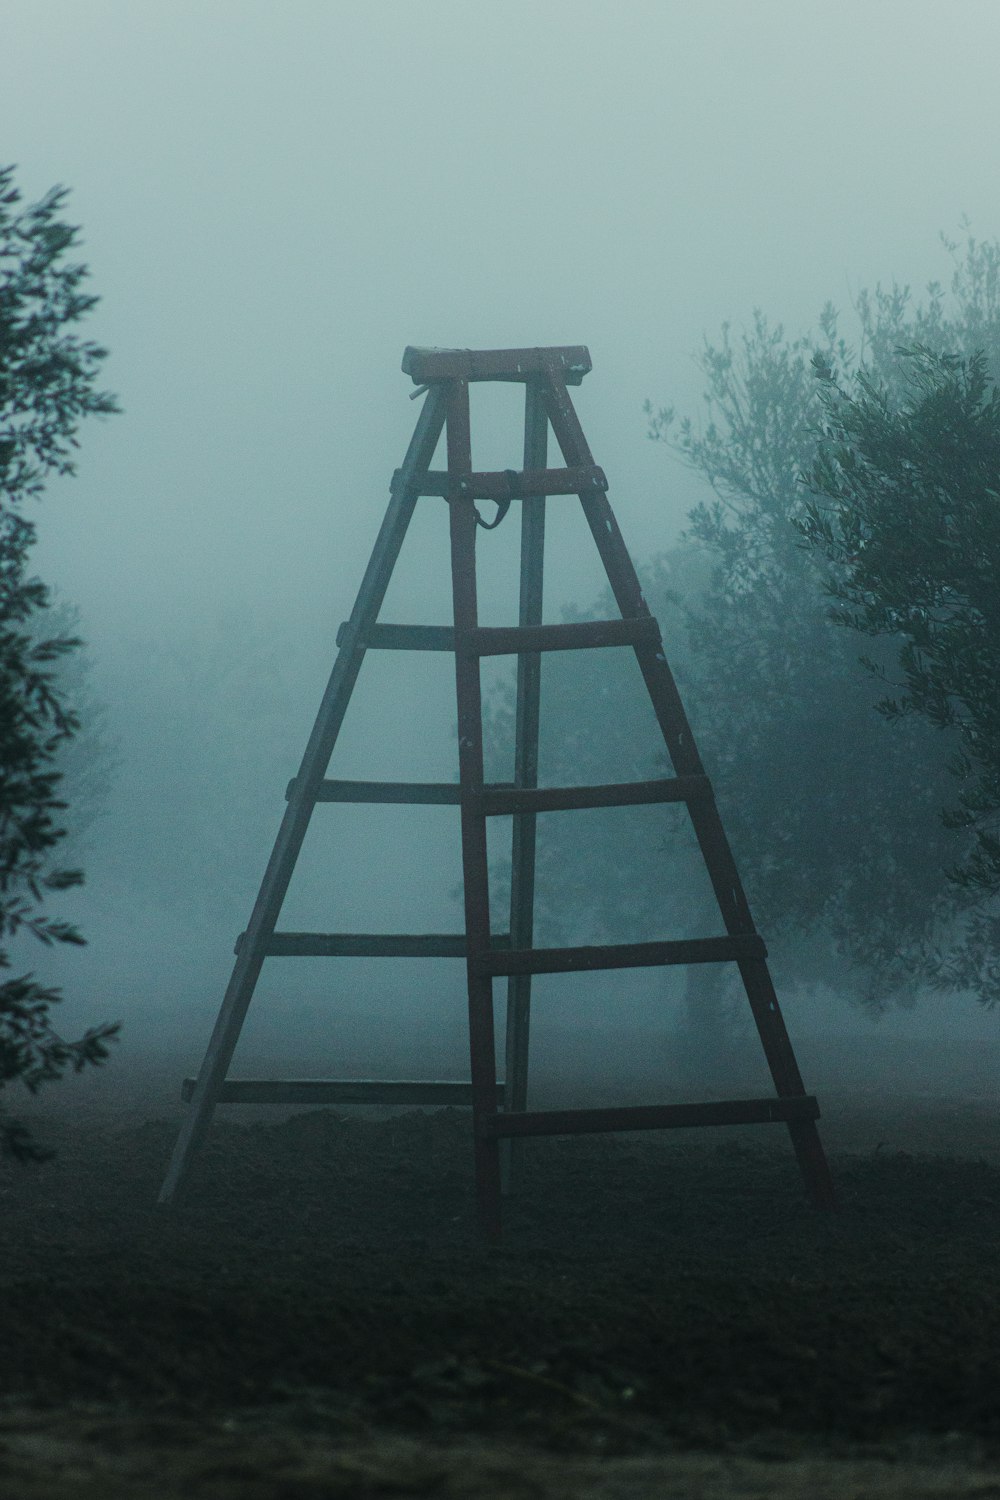 a wooden swing set in the middle of a foggy field